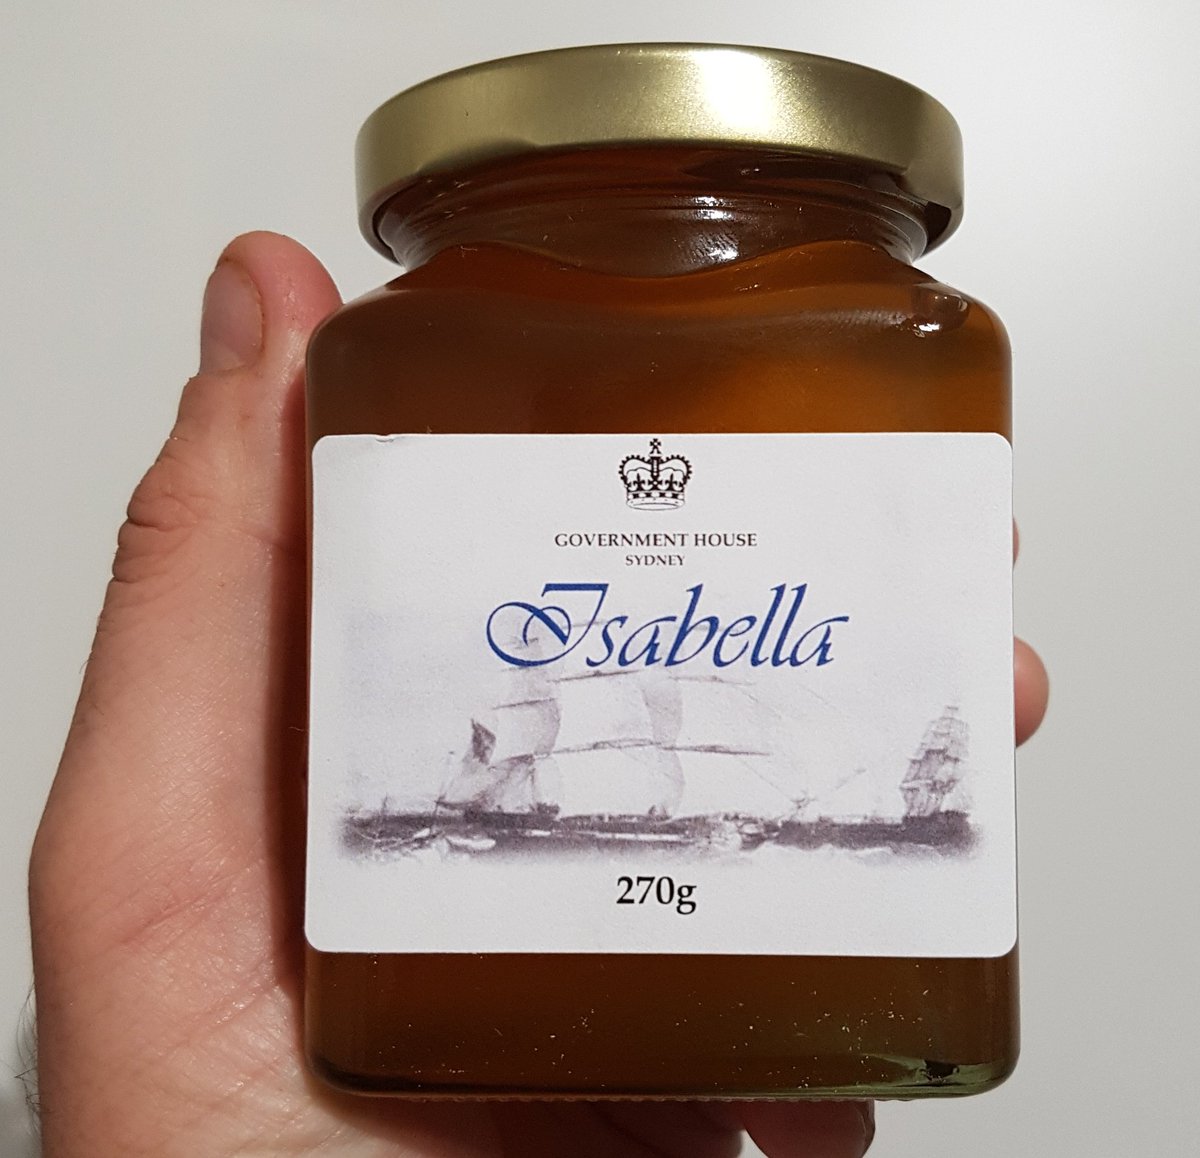 One of the fun things that  #beekeepers do with each other is swap unique honey flavours. I provided some of the  @Aust_Parliament  #honey and a bottle of bochet. In return I received some of the Governor's honey, Isabella, named after the ship the bought  #bees to Australia